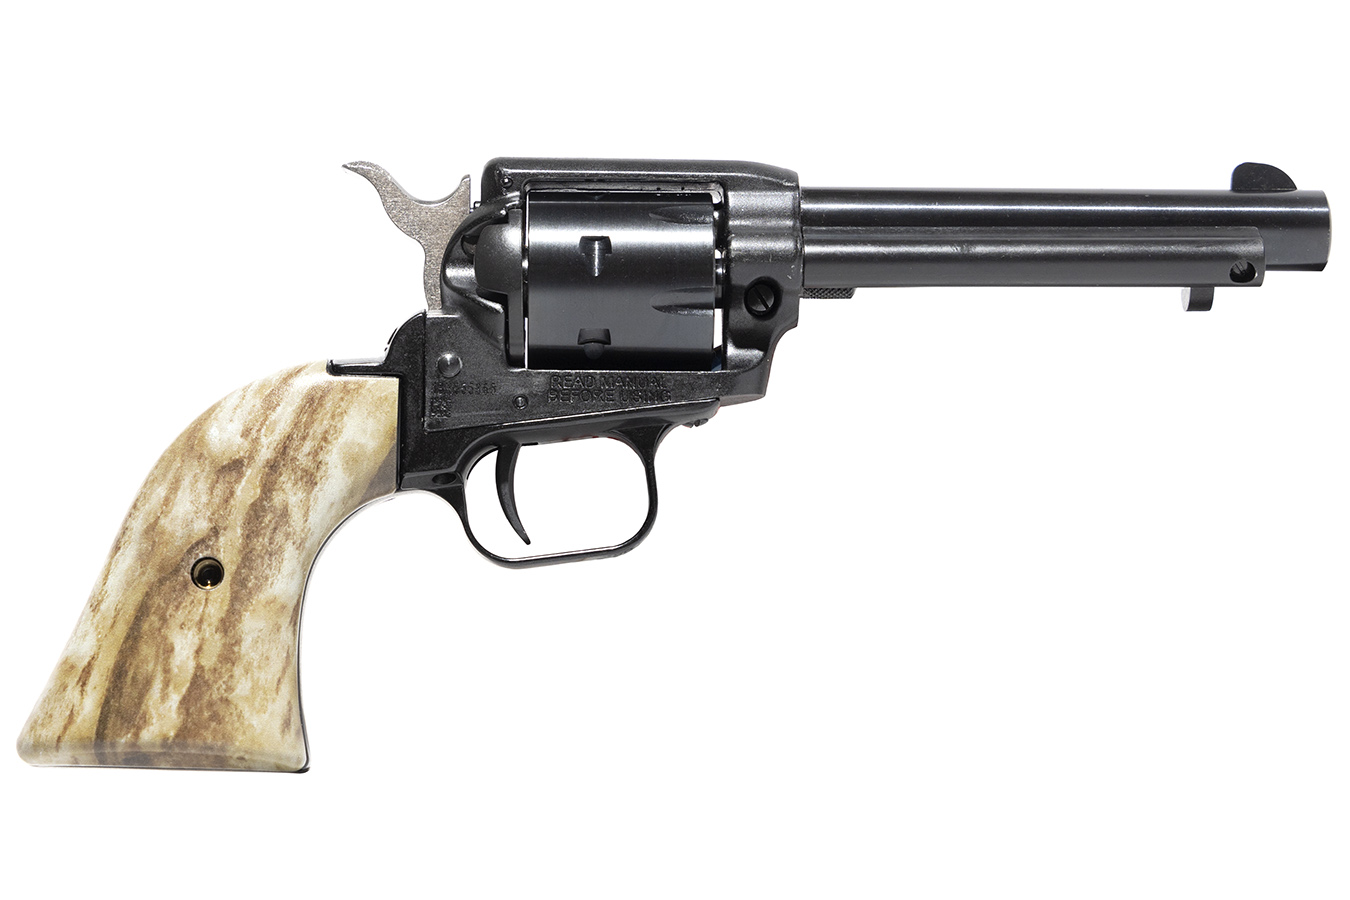 ROUGH RIDER 22LR REVOLVER WITH BLUED BARREL AND STAG GRIPS